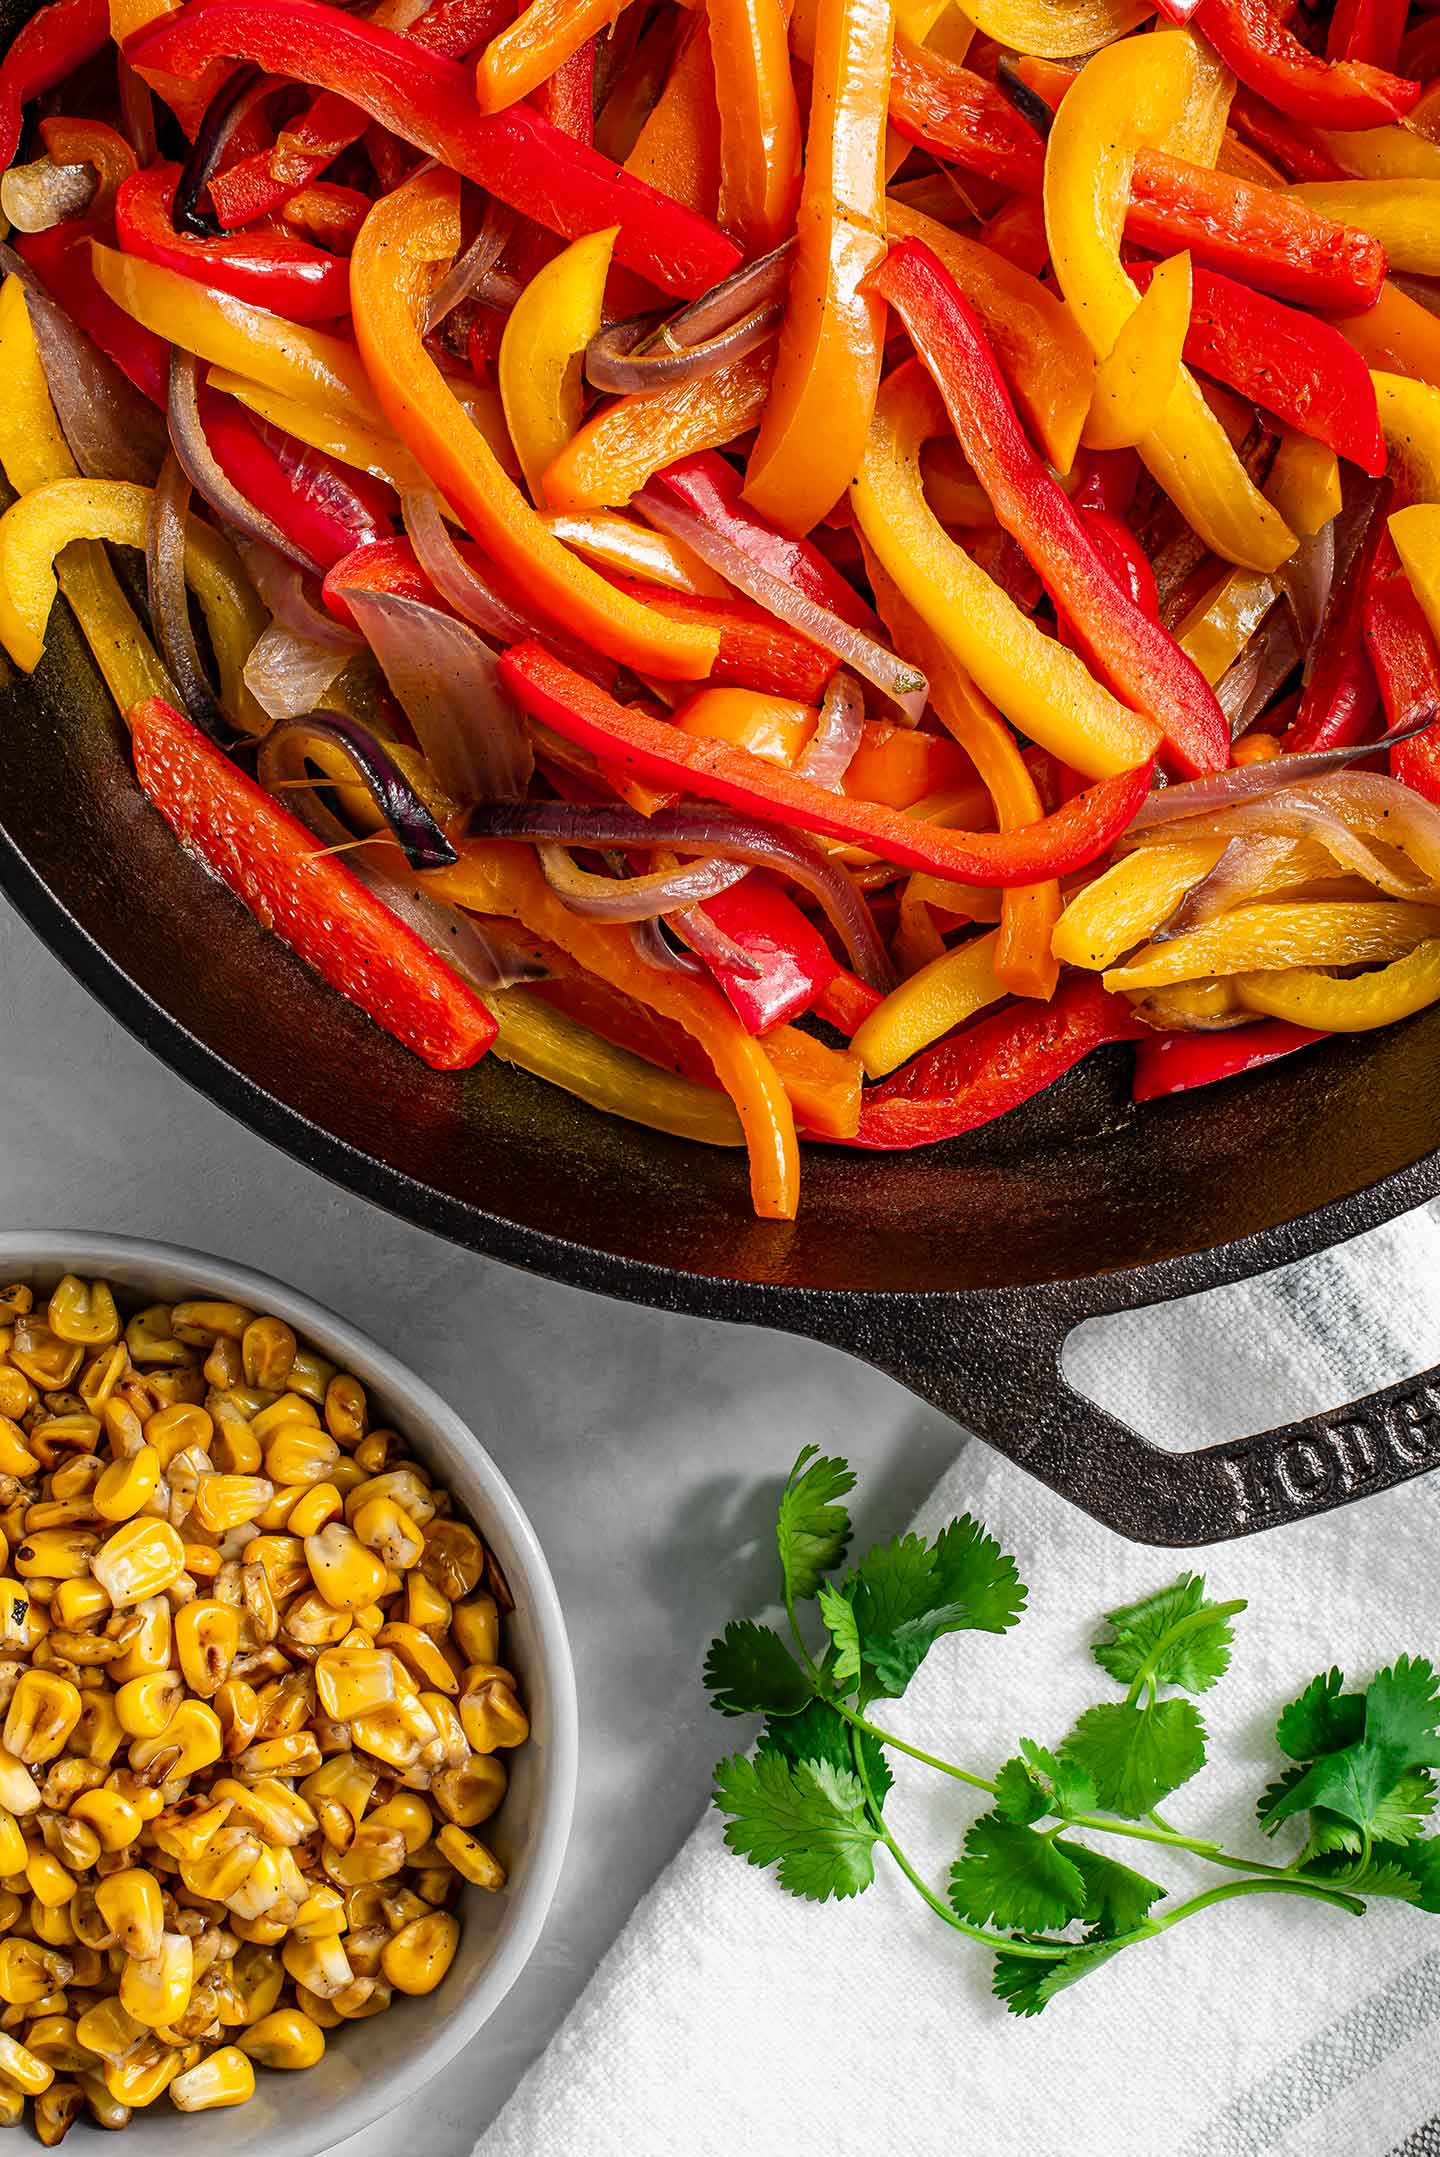 Top down view of skillet charred corn in a small dish and grilled red onion and bell peppers in a cast-iron skillet.